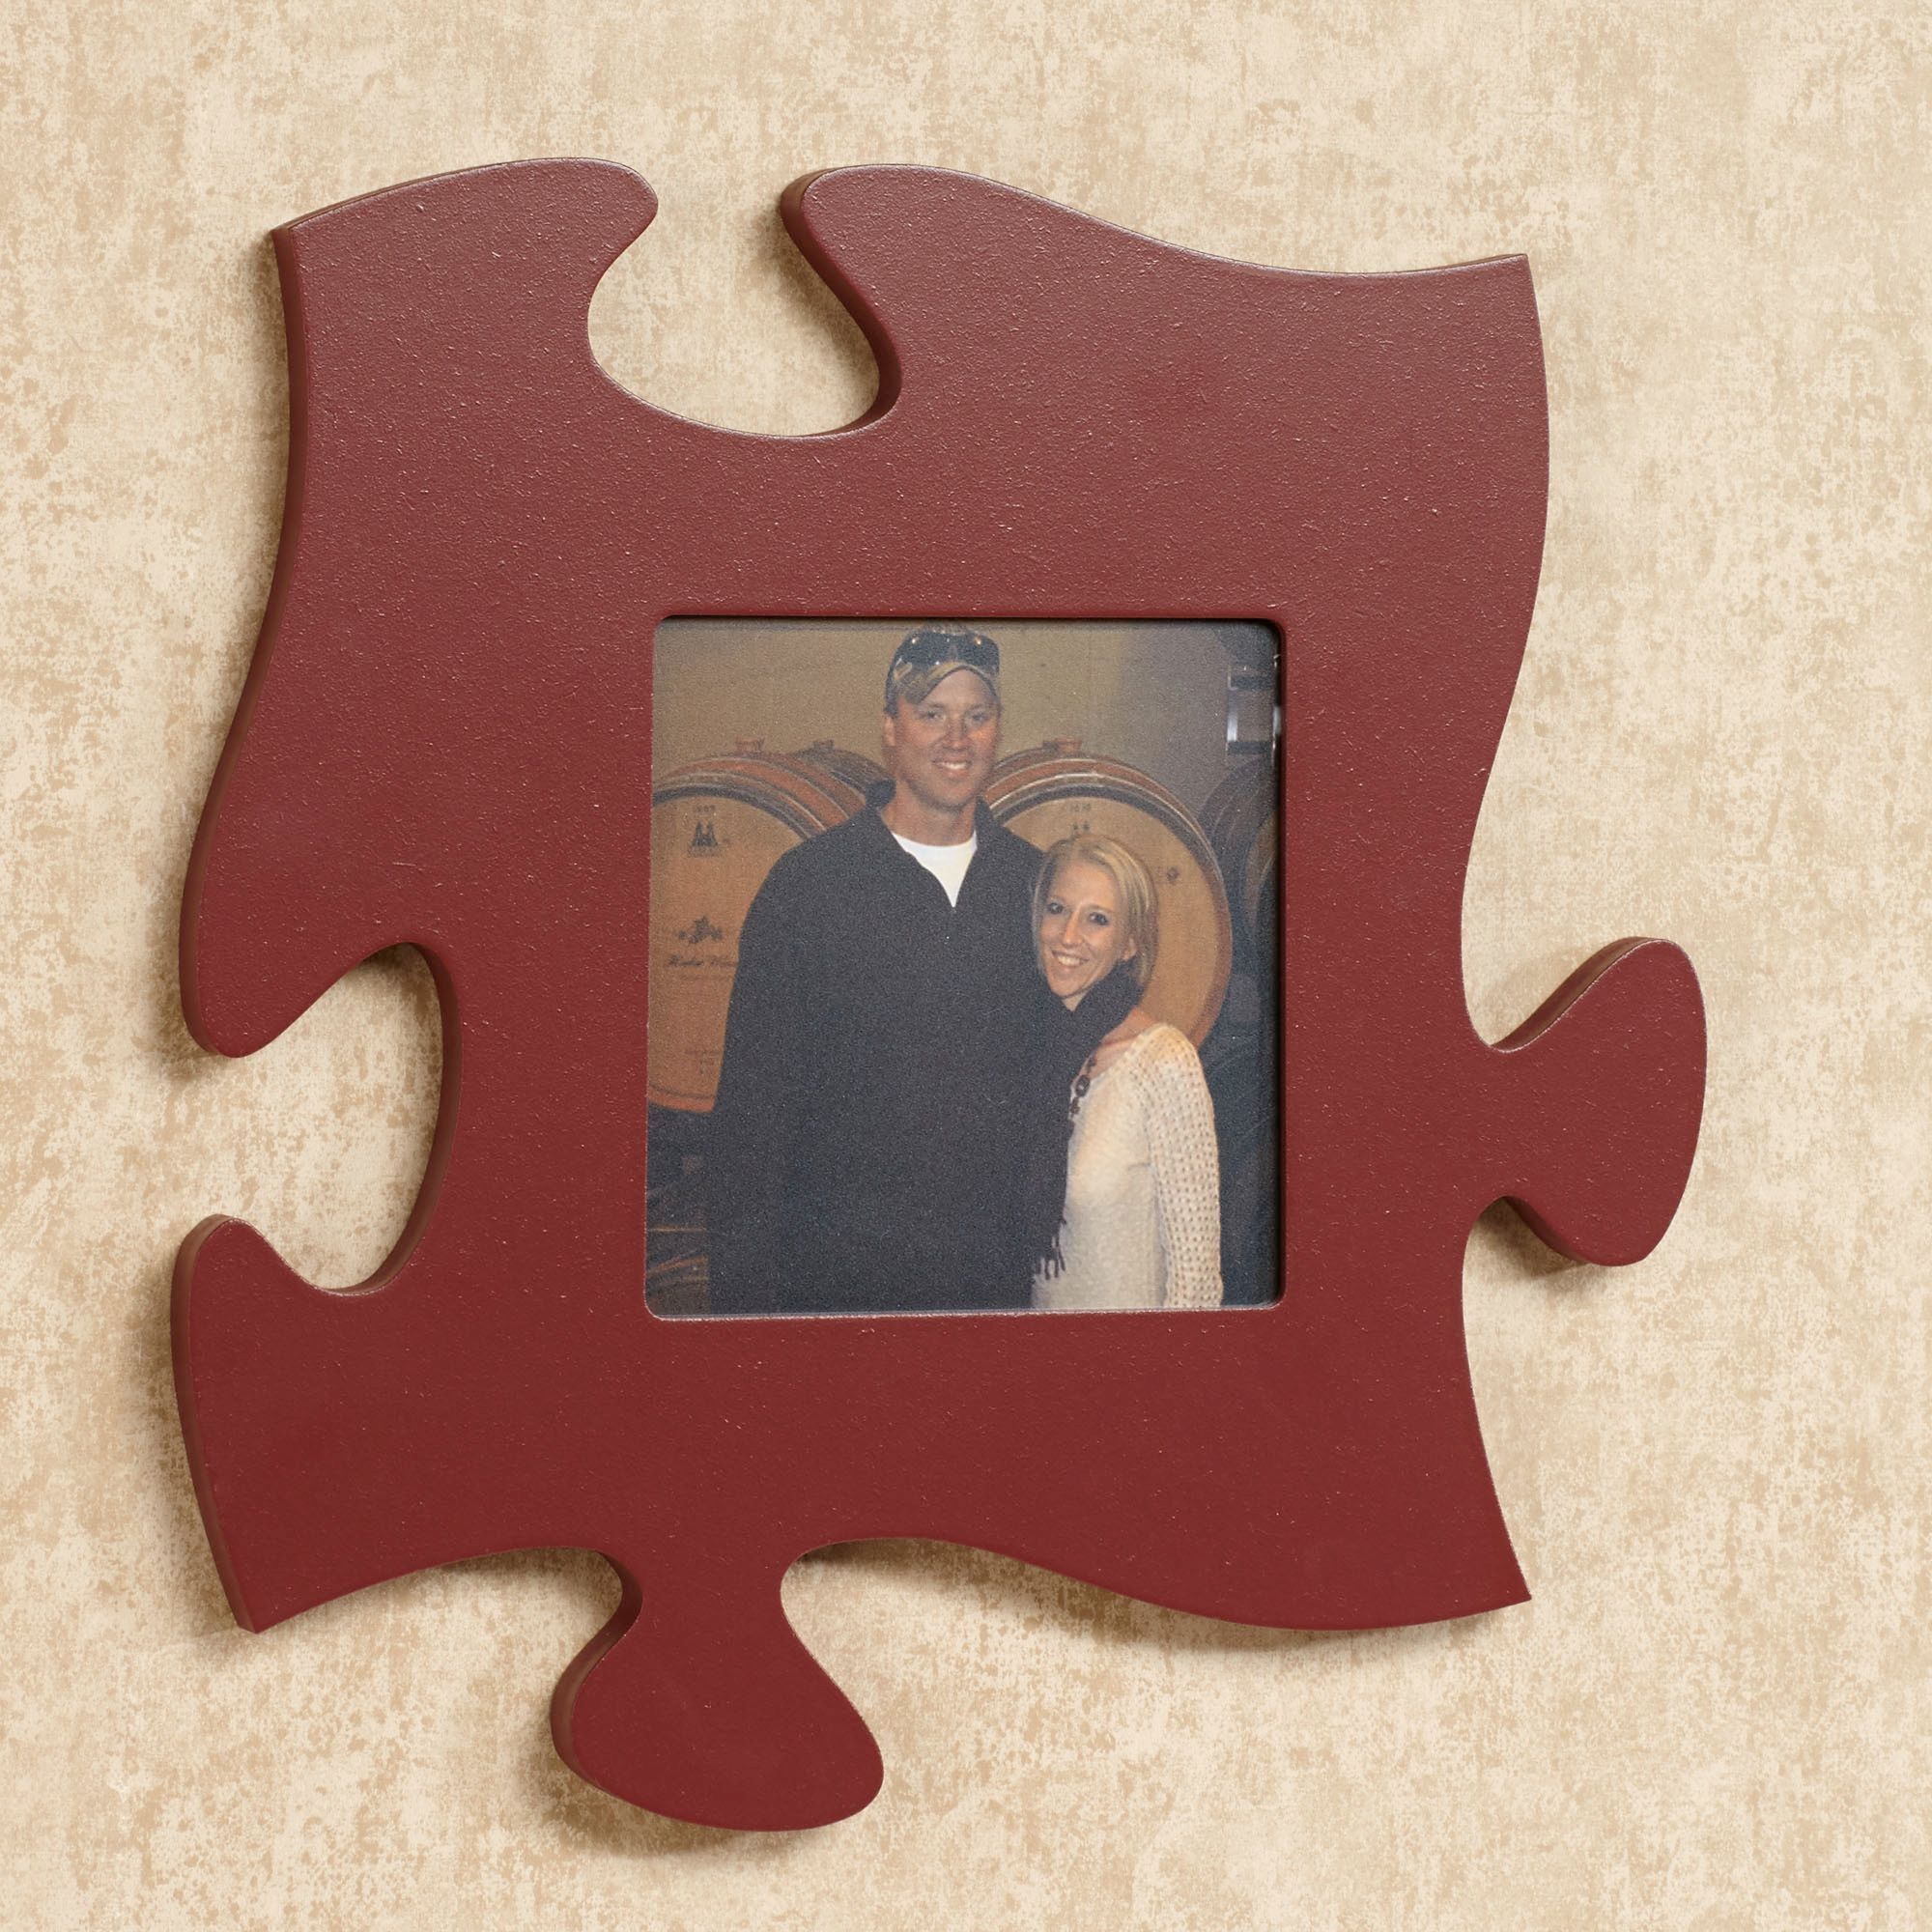 Every Family Photo Frame Puzzle Piece Wall Art Regarding Puzzle Wall Art (View 3 of 15)